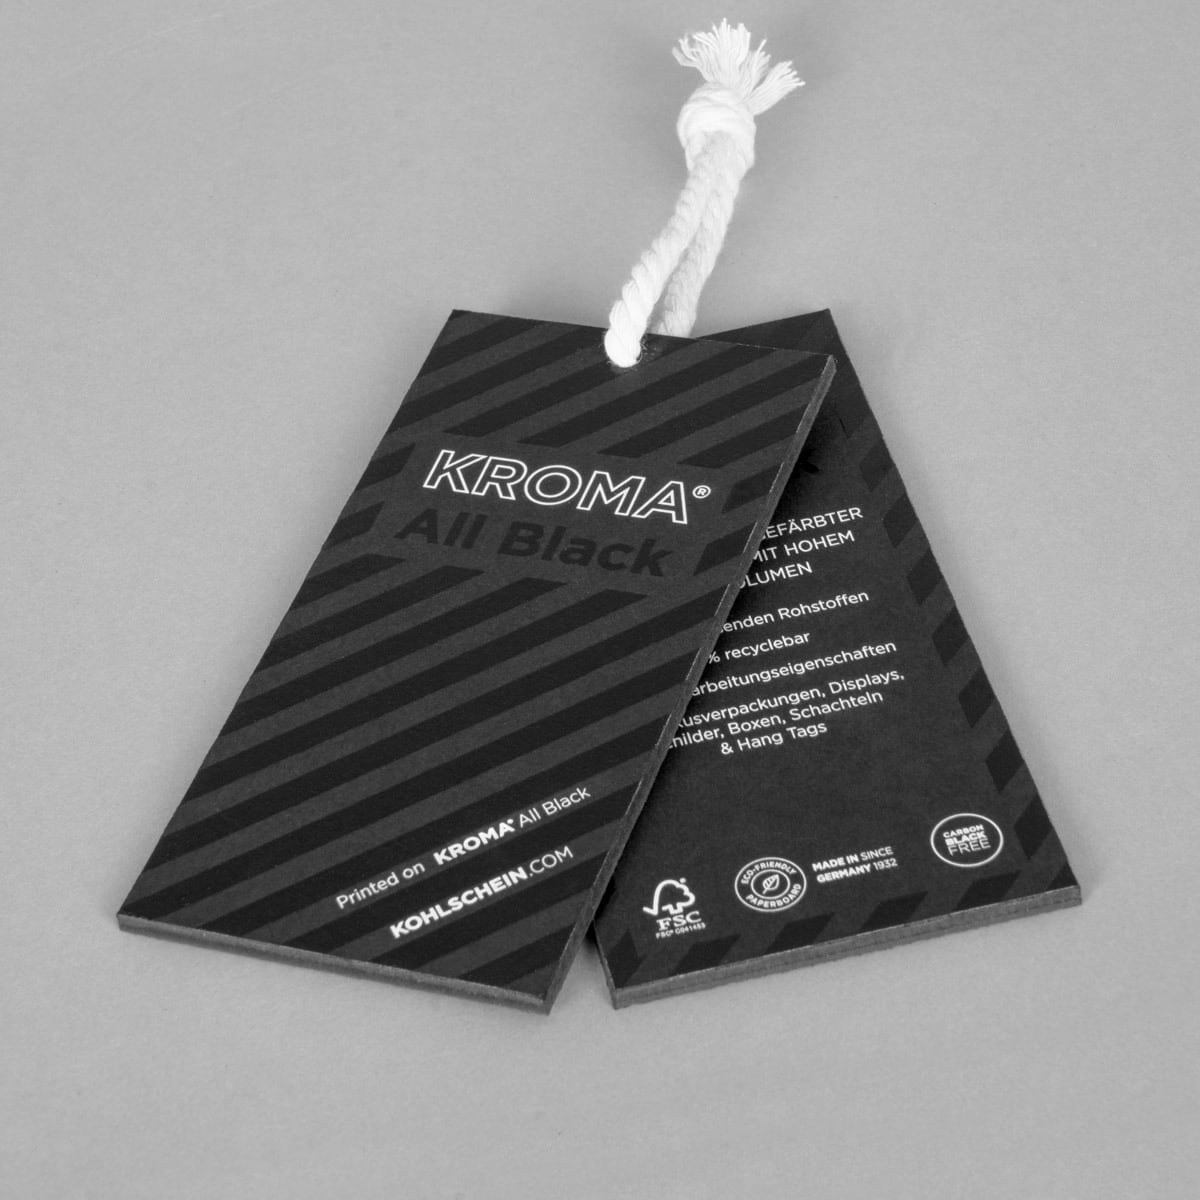 Signs / Hangtags made of KROMA All Black